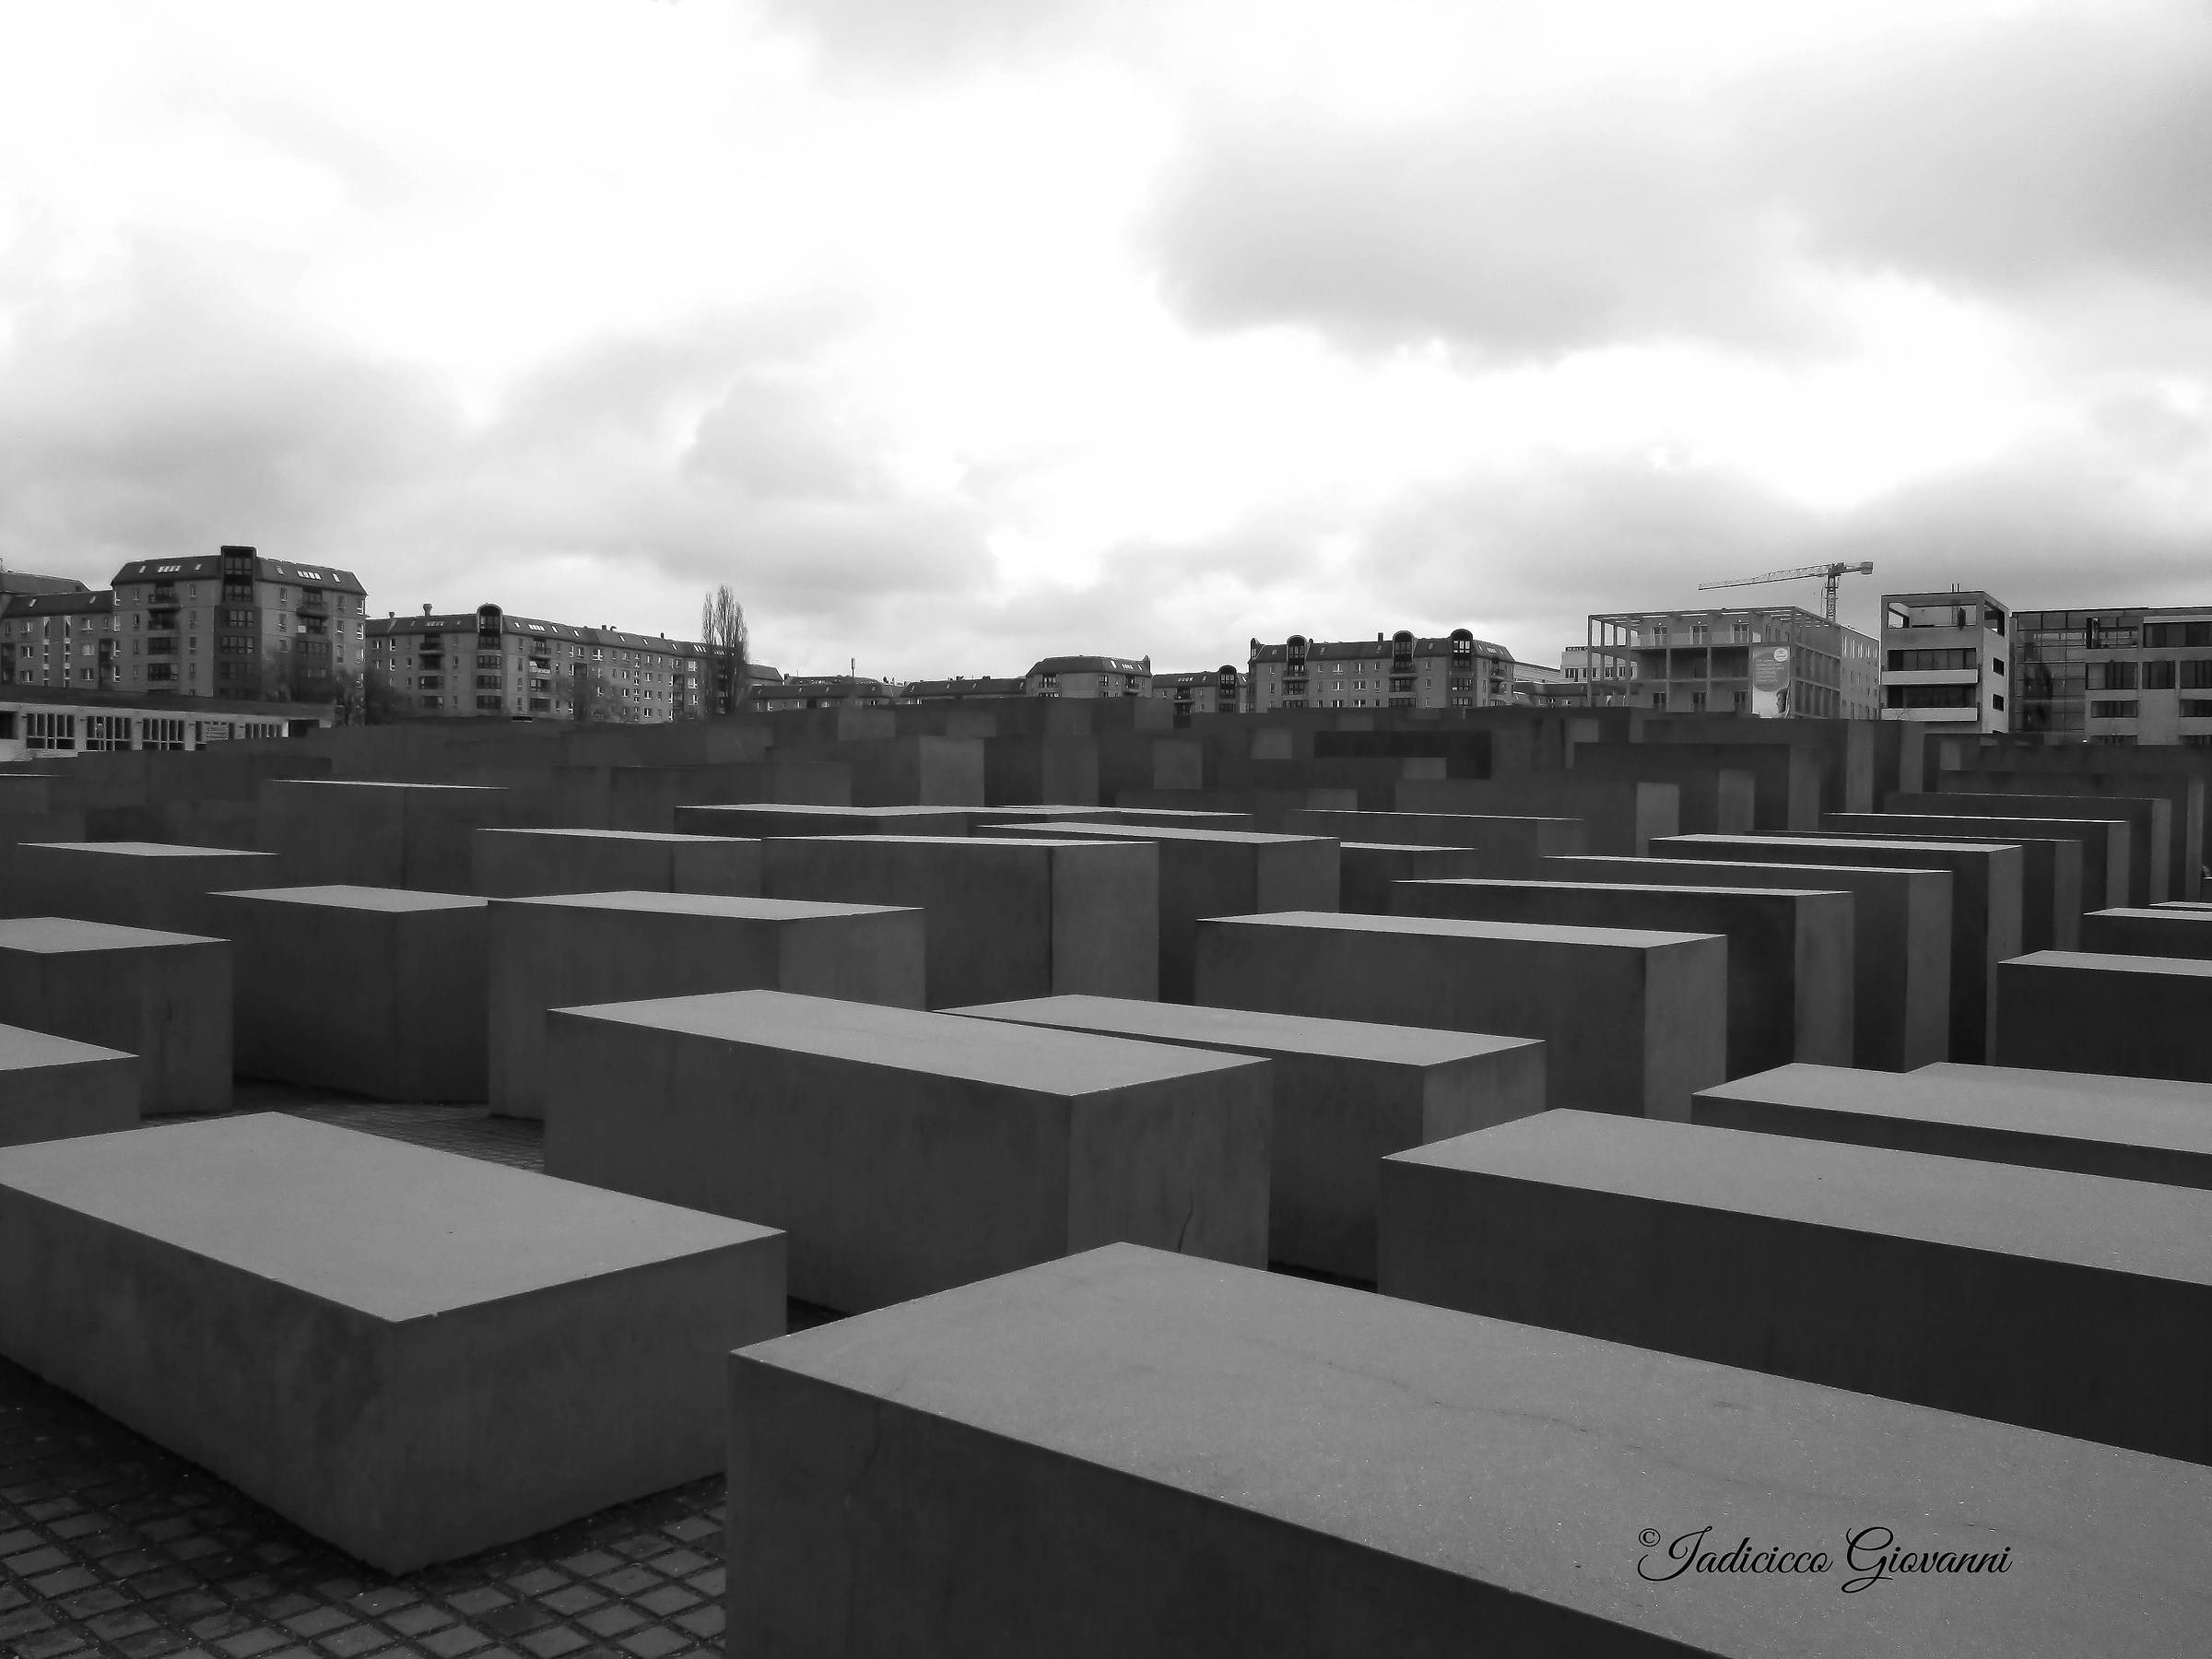 Monument to Jewish victims of World War II...